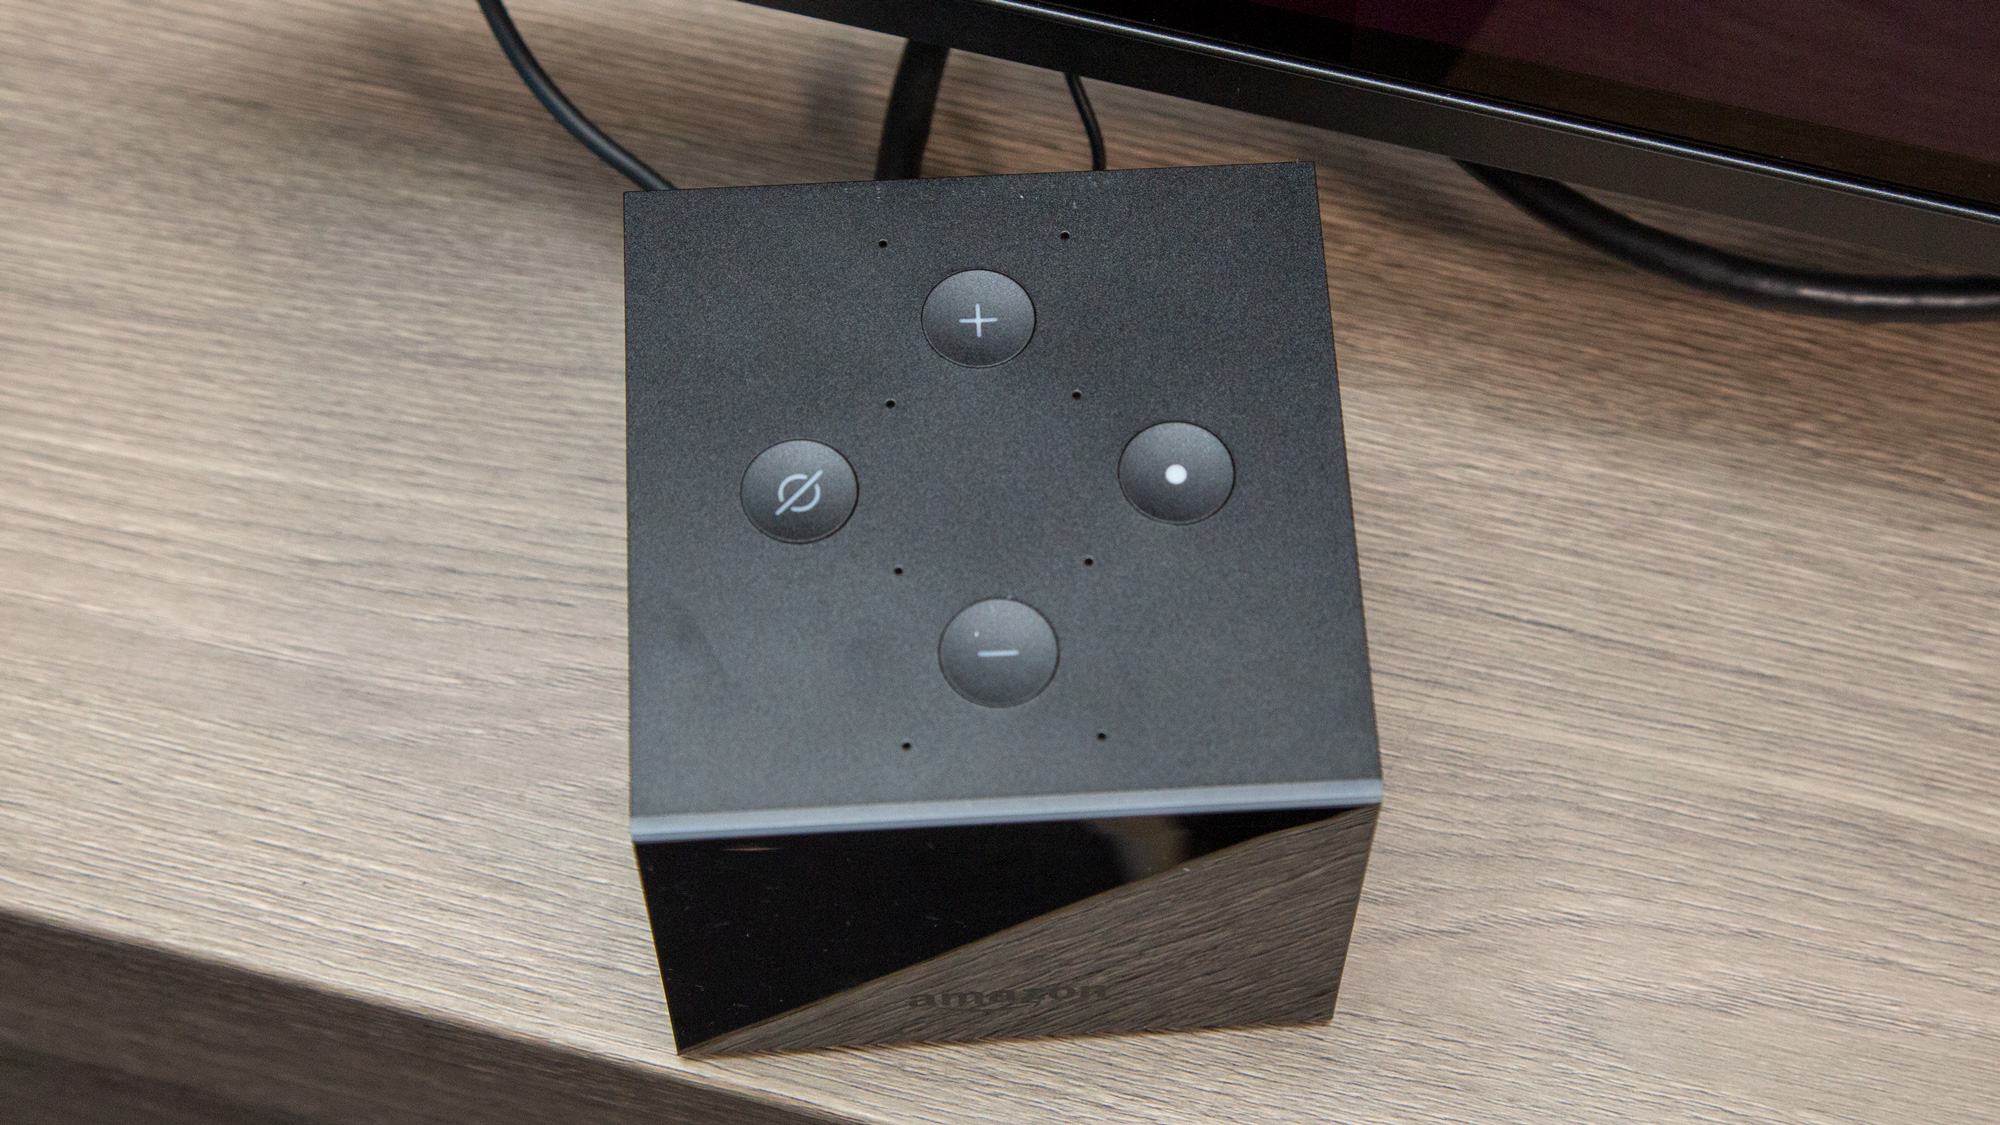 Amazon Fire TV Cube (2019) Review: The Fire TV Cube is a solid sequel, packing speed to amplify Alexa.